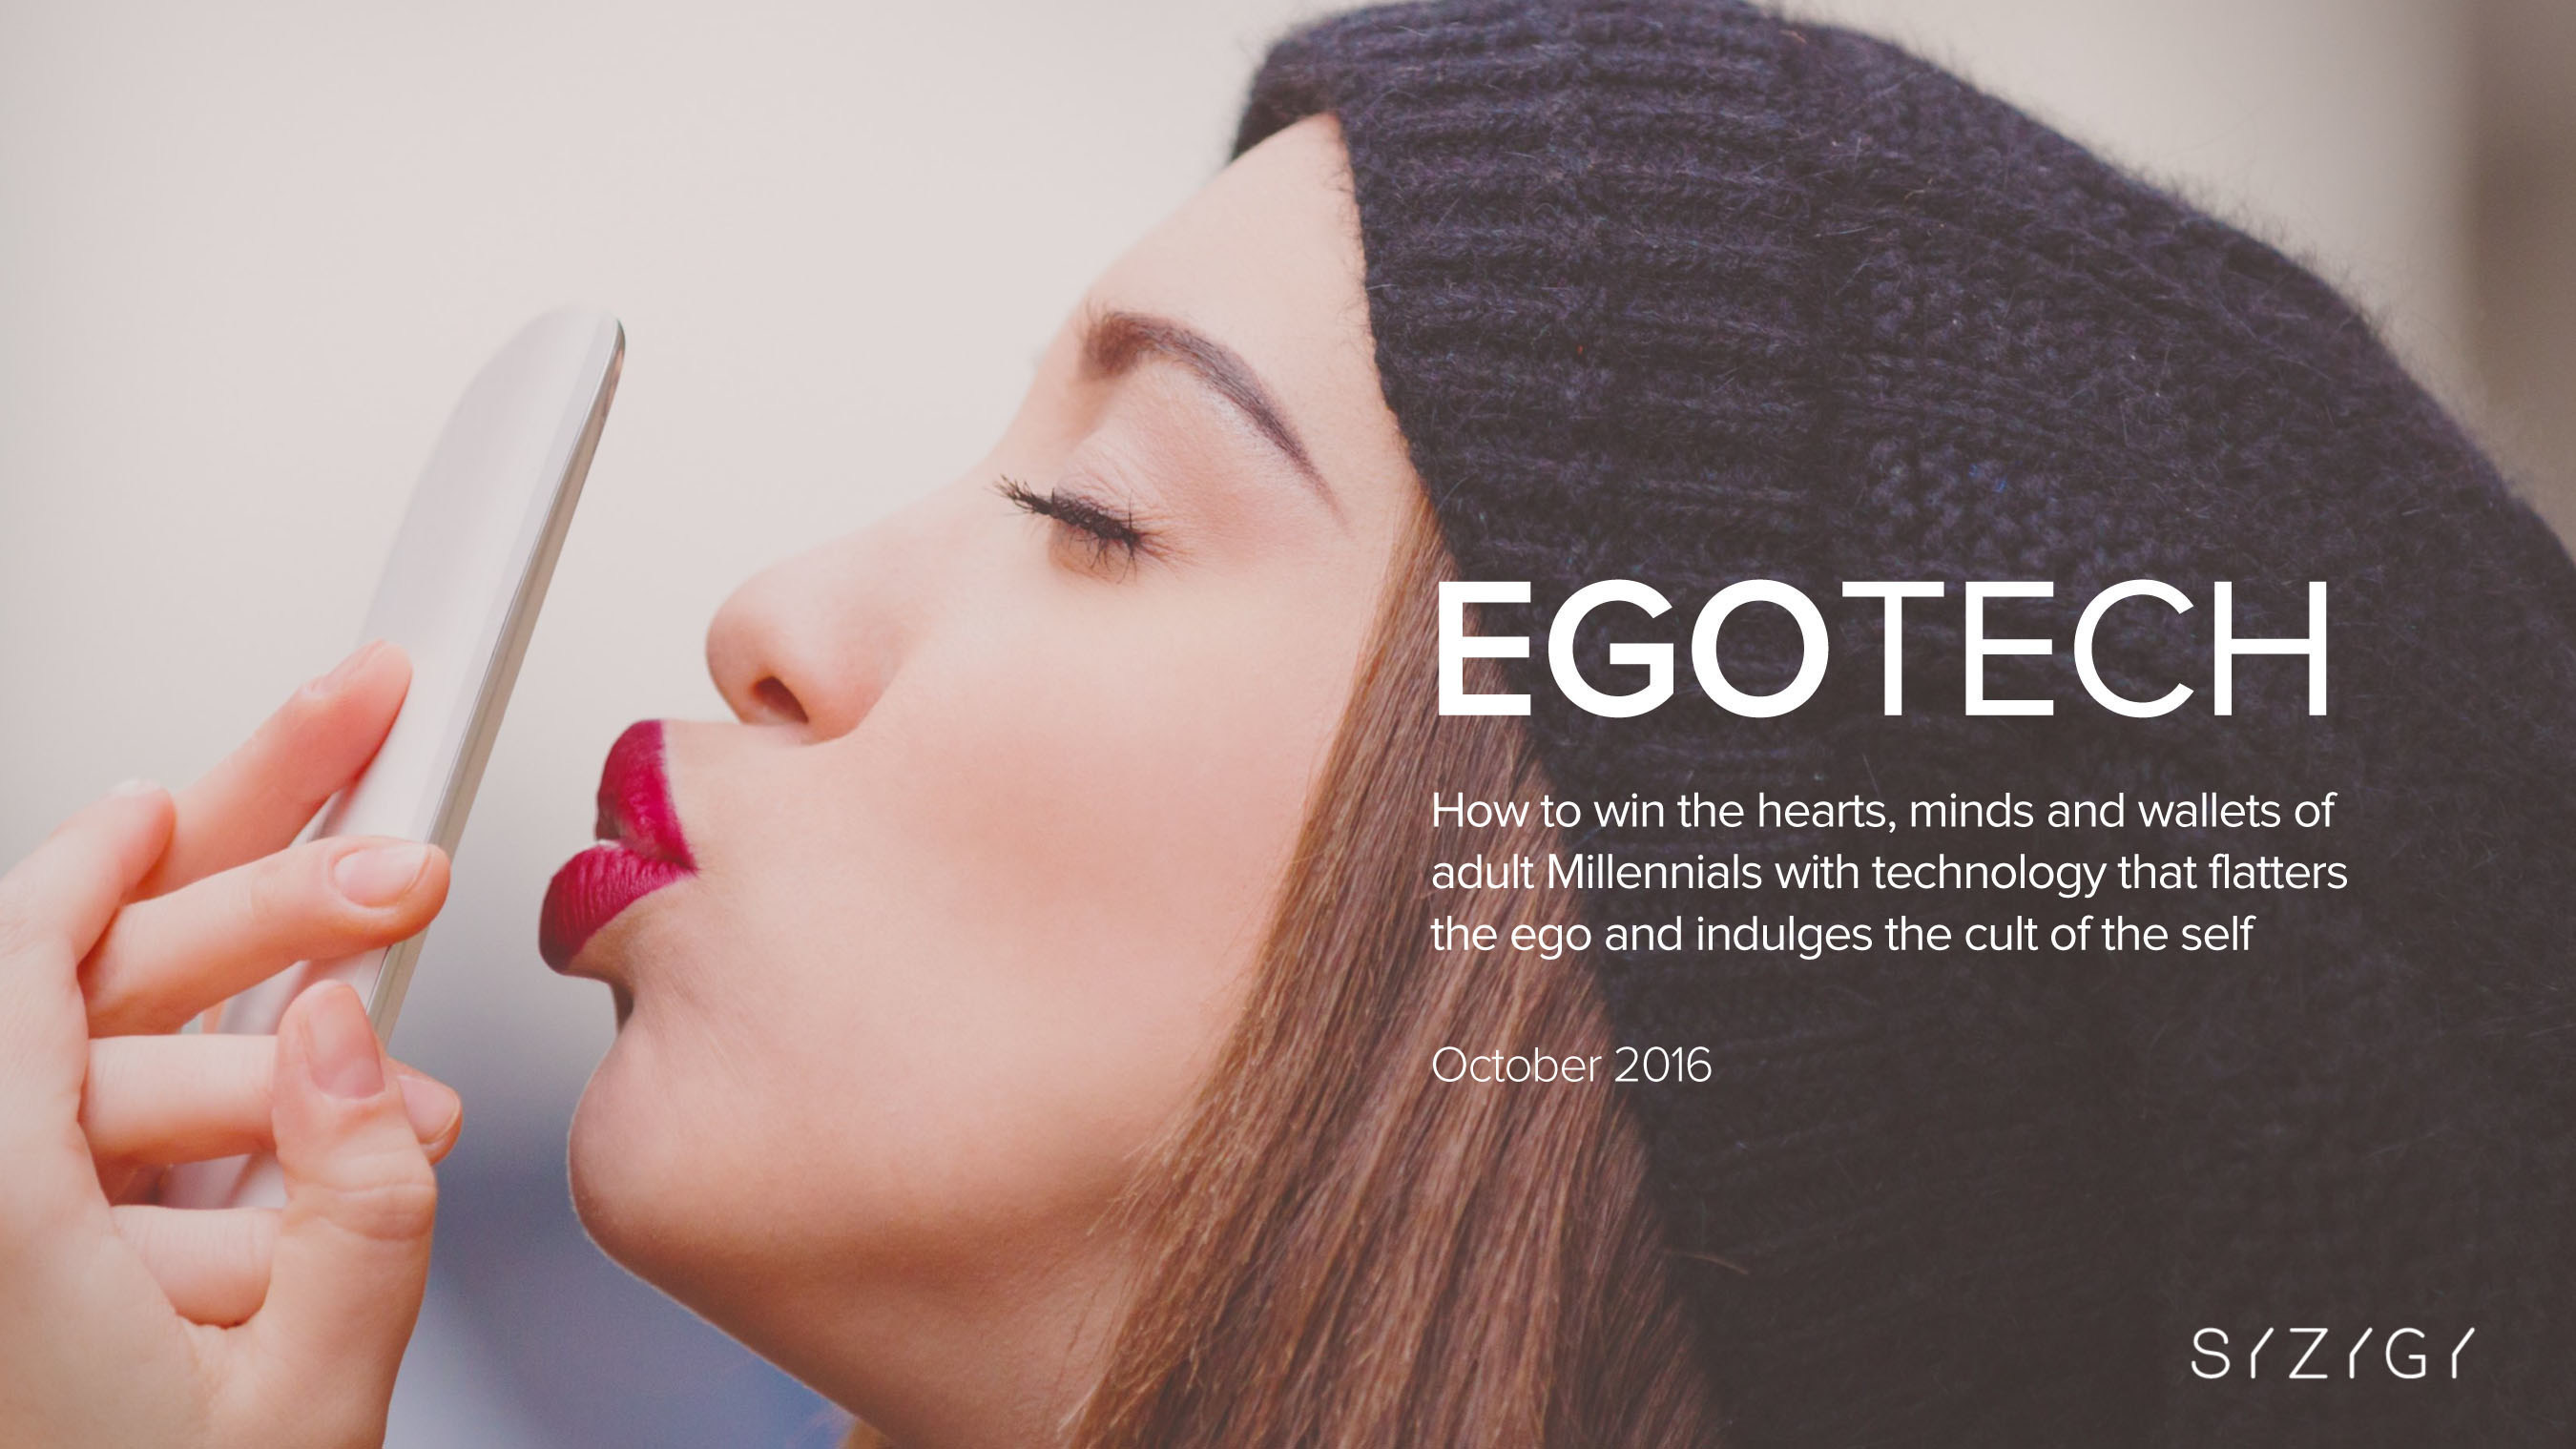 EgoTech: How to win the hearts, minds and wallets of adult Millennials, is a national research study conducted in 2016 by SYZYGY, a digital marketing agency.